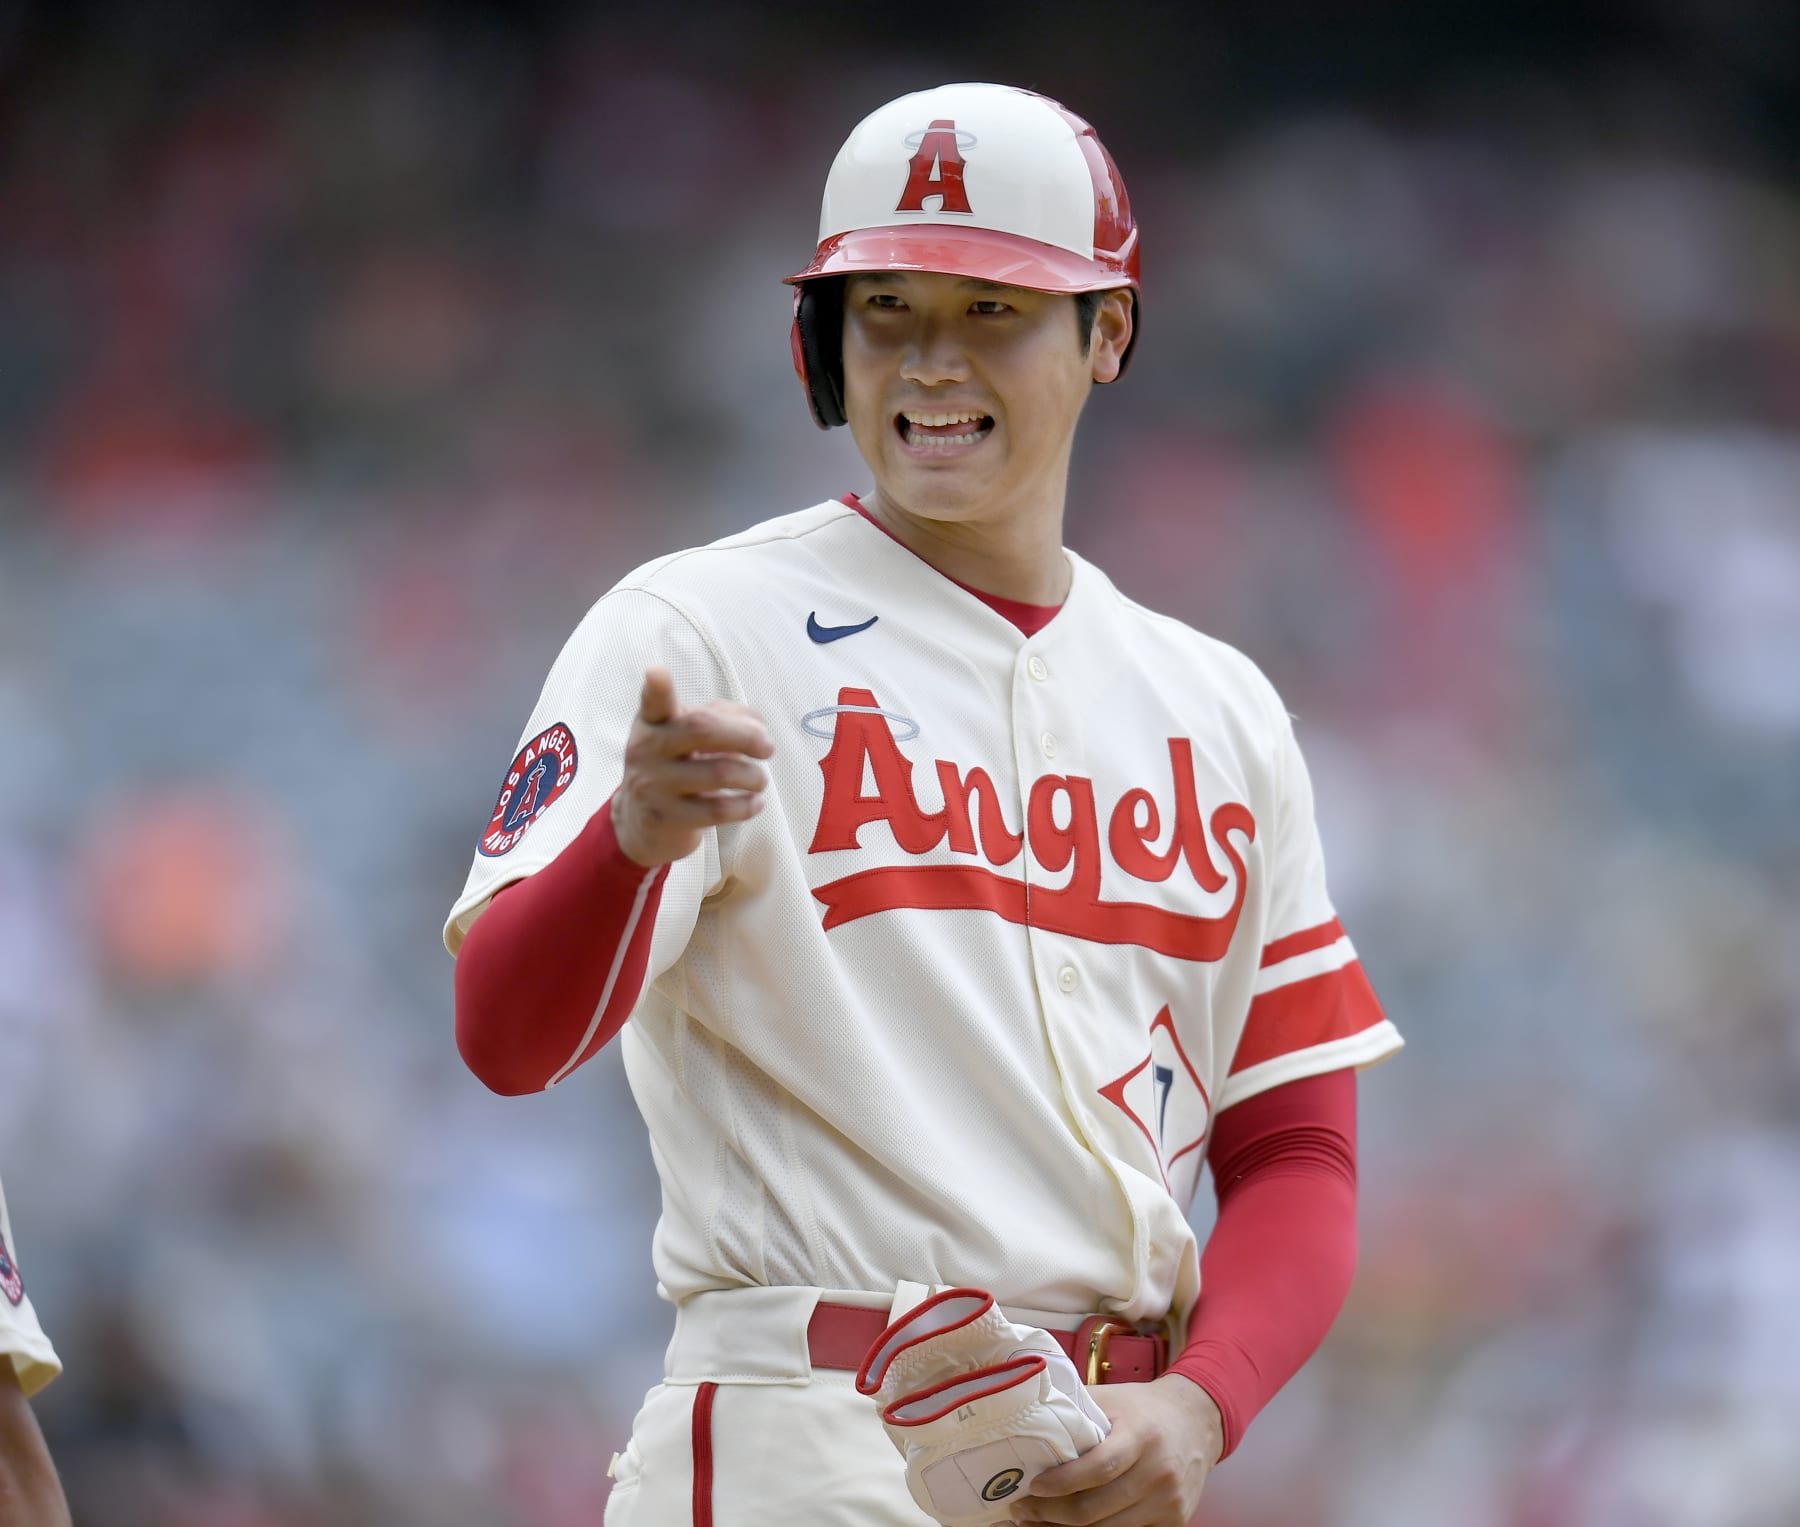 Shohei Ohtani gets win for Angels as pitcher, ties for MLB home run lead